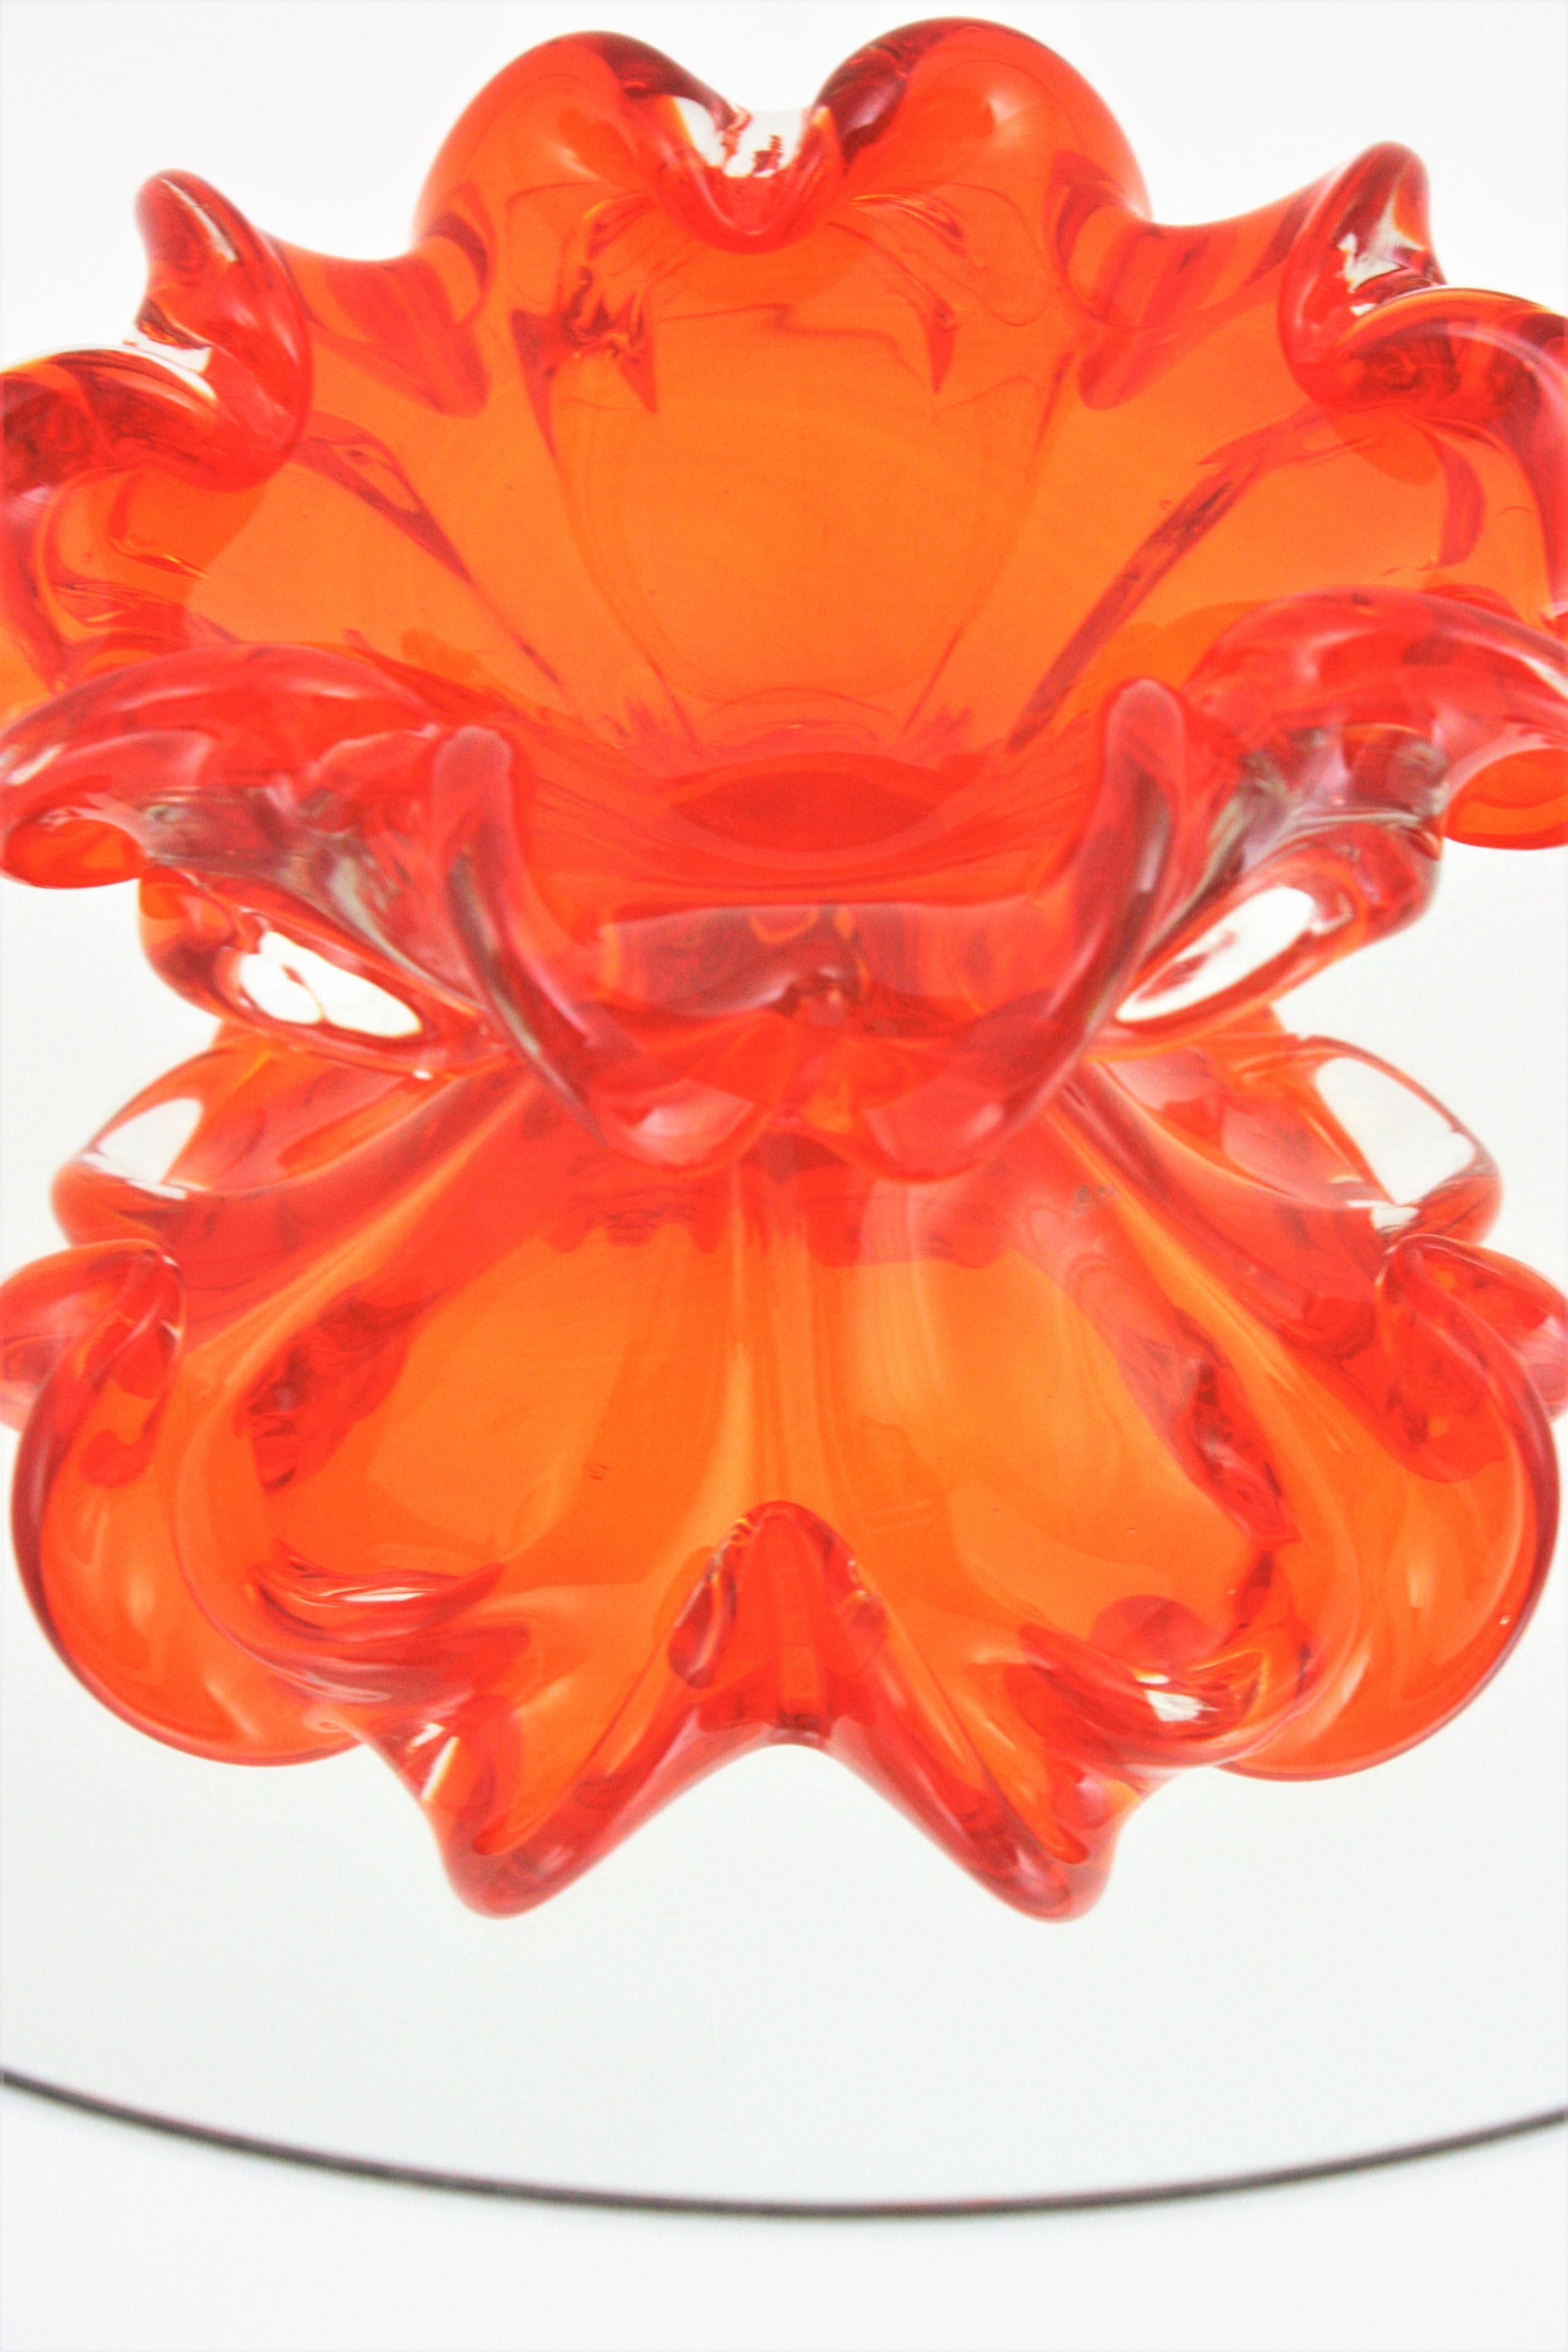 Midcentury Italian Murano Sommerso Orange and Clear Art Glass Bowl / Ashtray For Sale 3